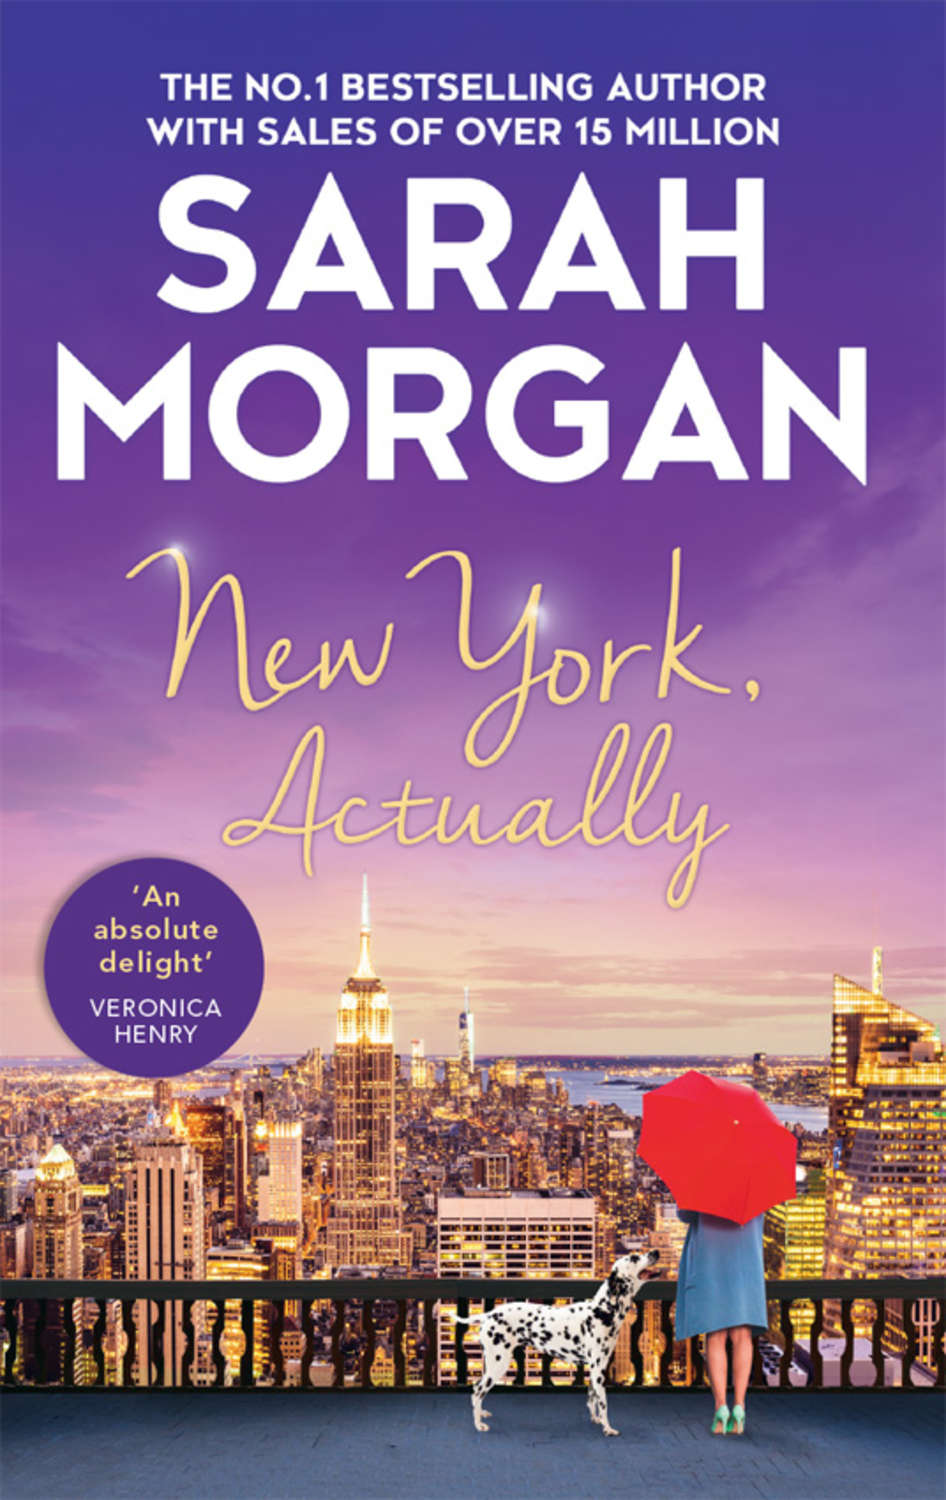 Sarah New York, Actually A sparkling romantic comedy from the